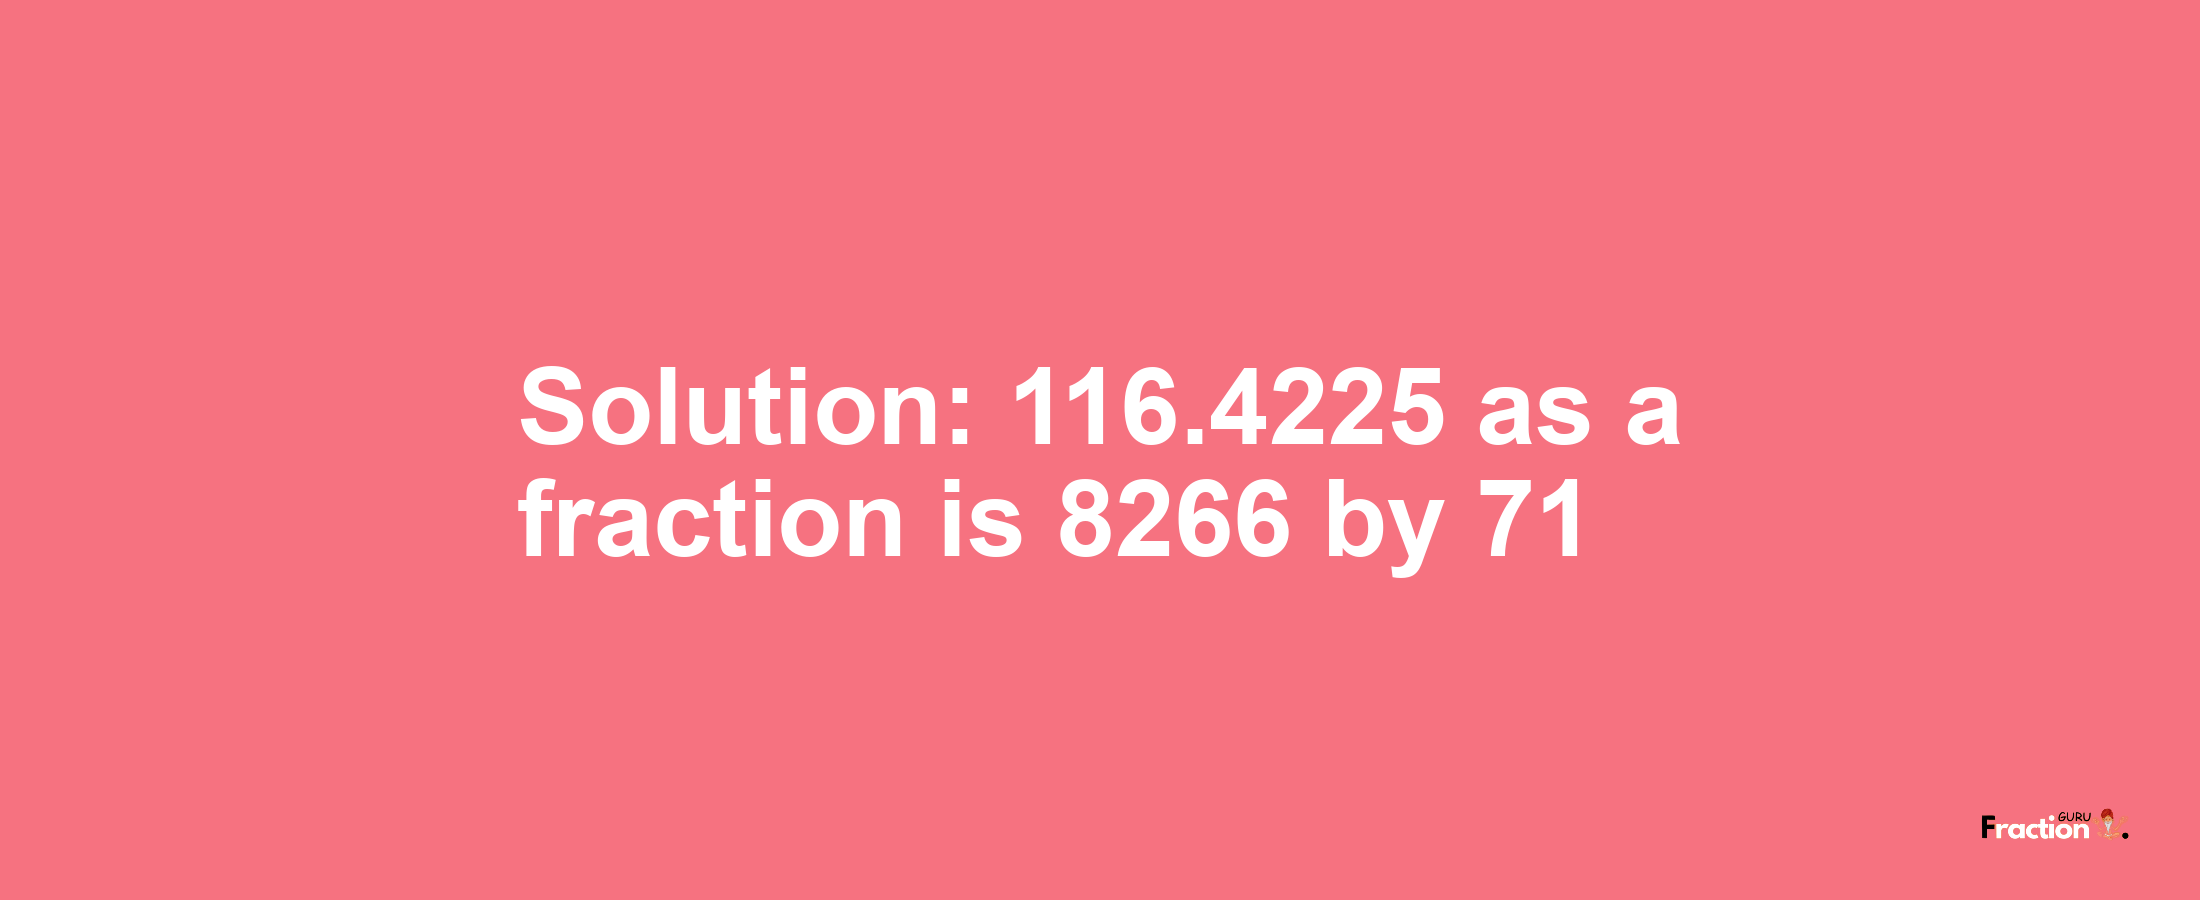 Solution:116.4225 as a fraction is 8266/71